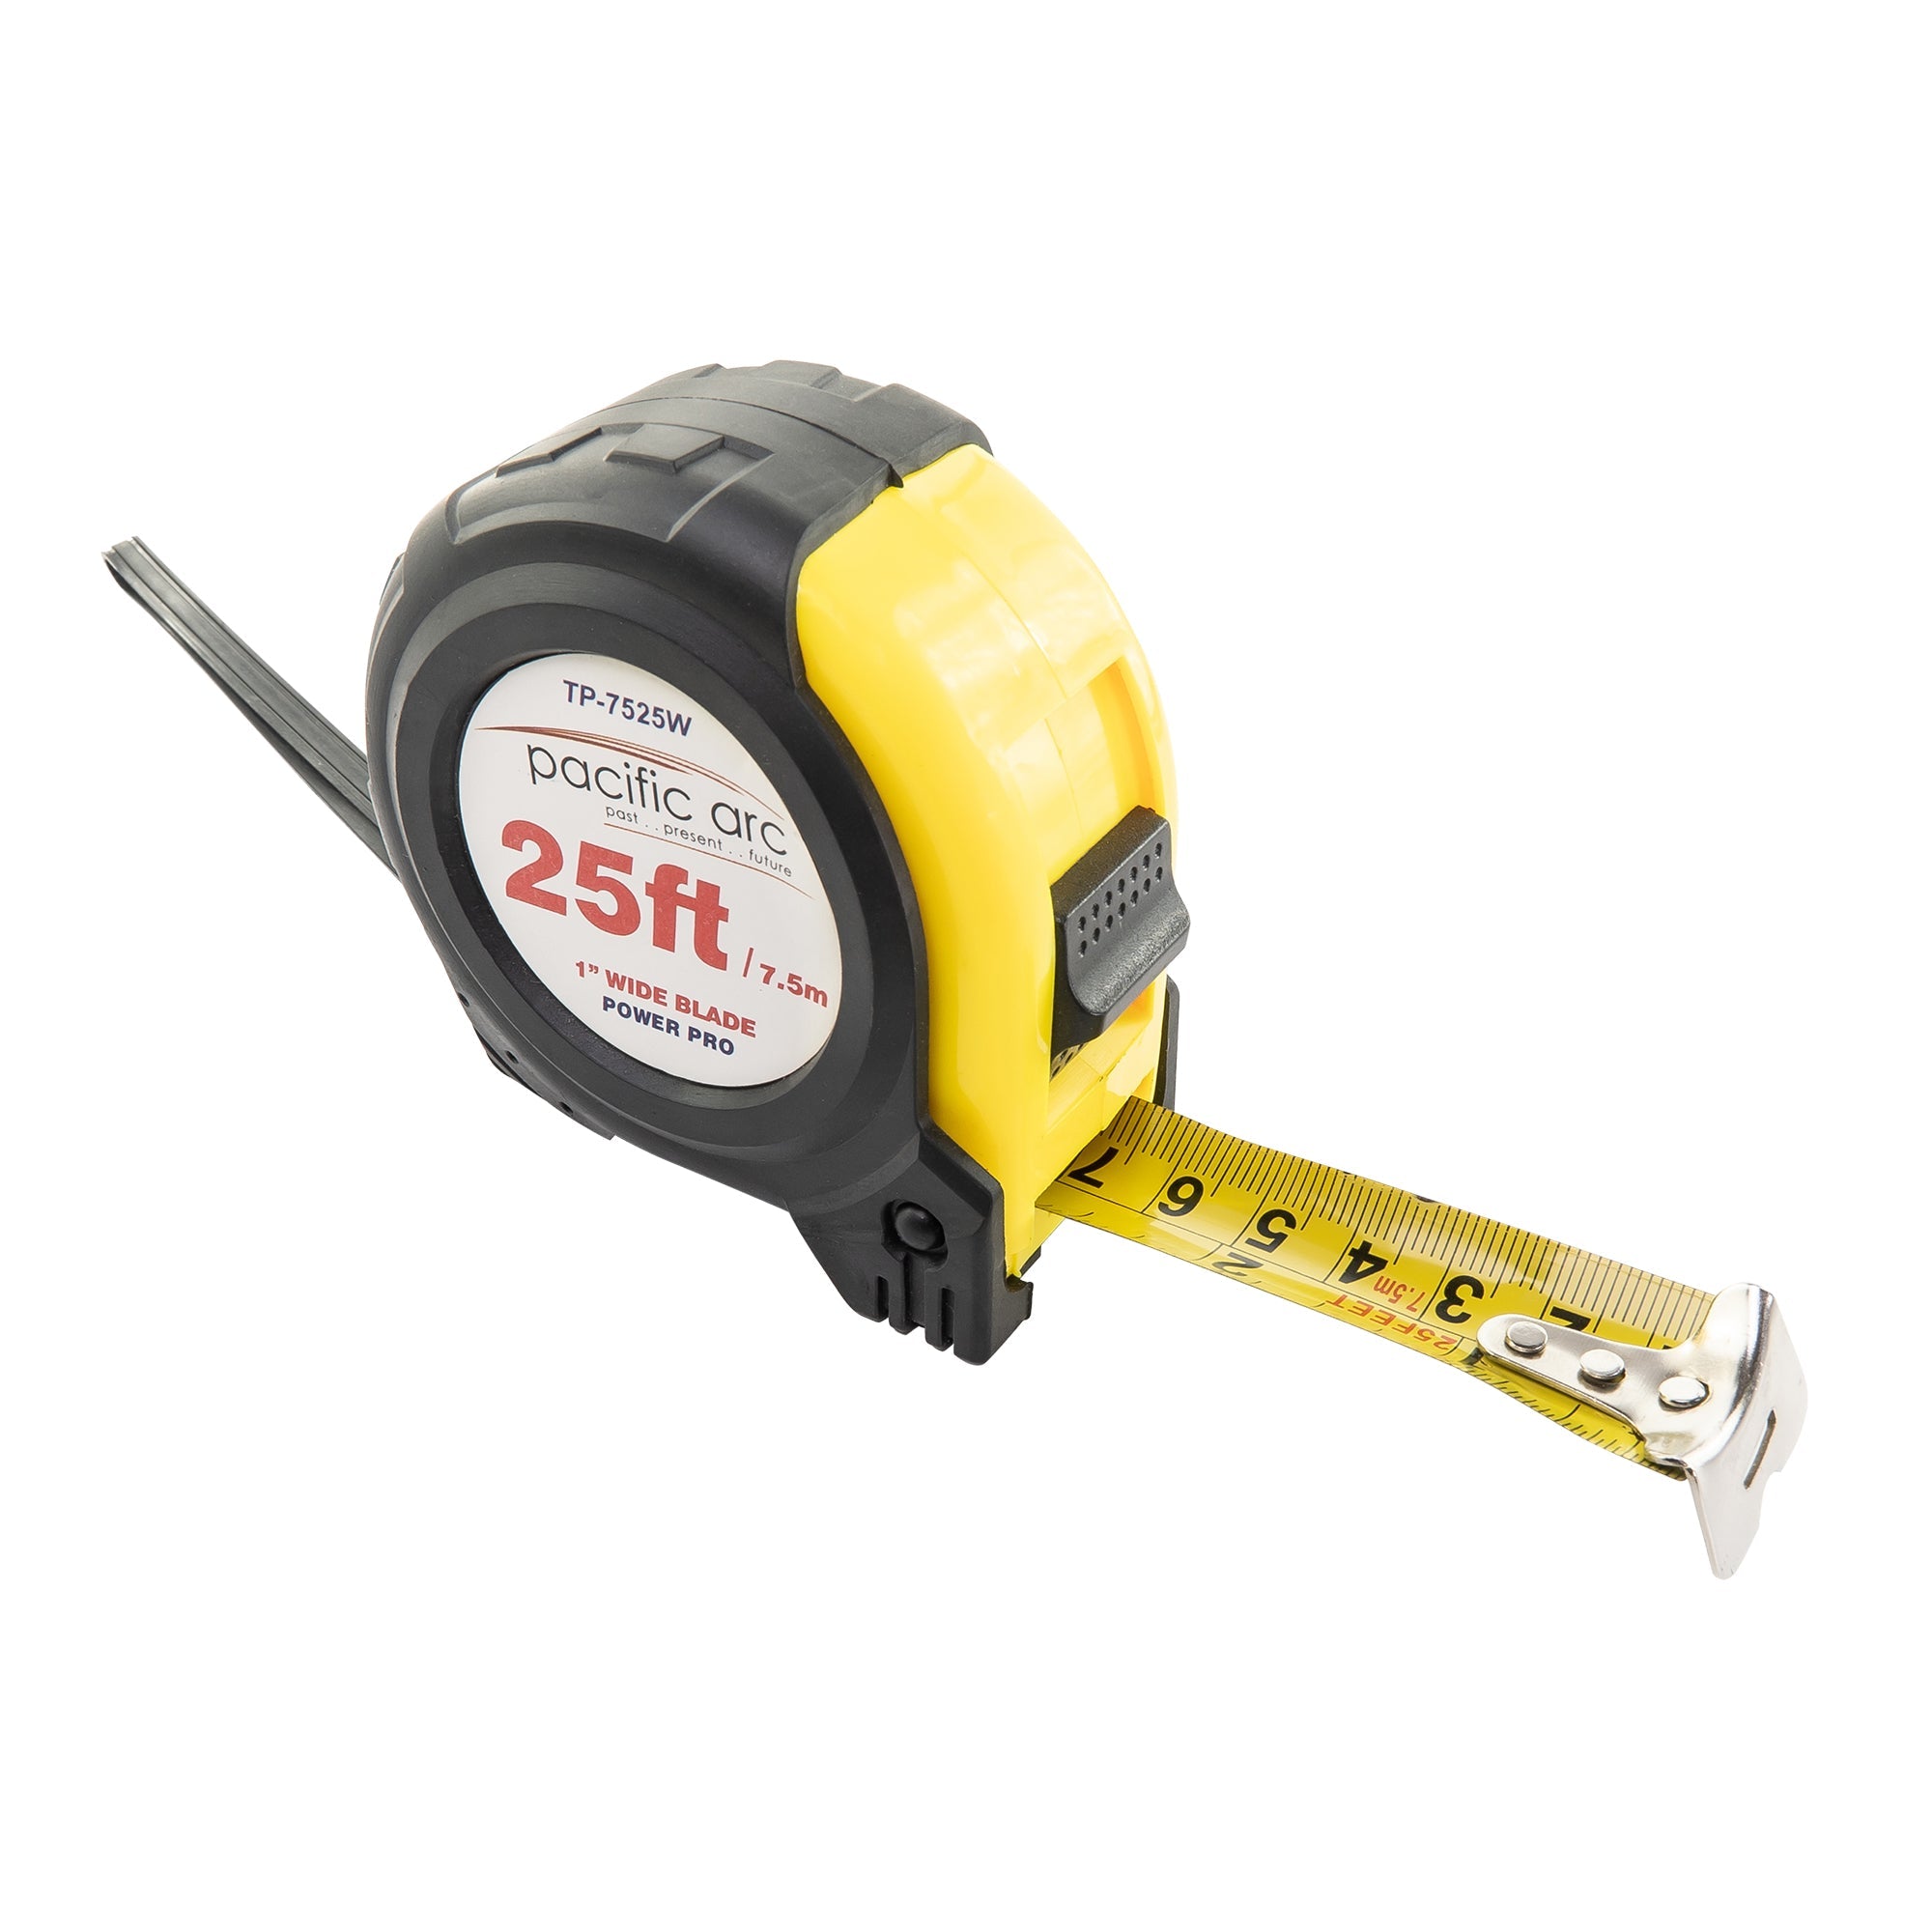 Deluxe Dual-Scale Power Tape Measure, 25 ft. / 7.5 m - Arbor